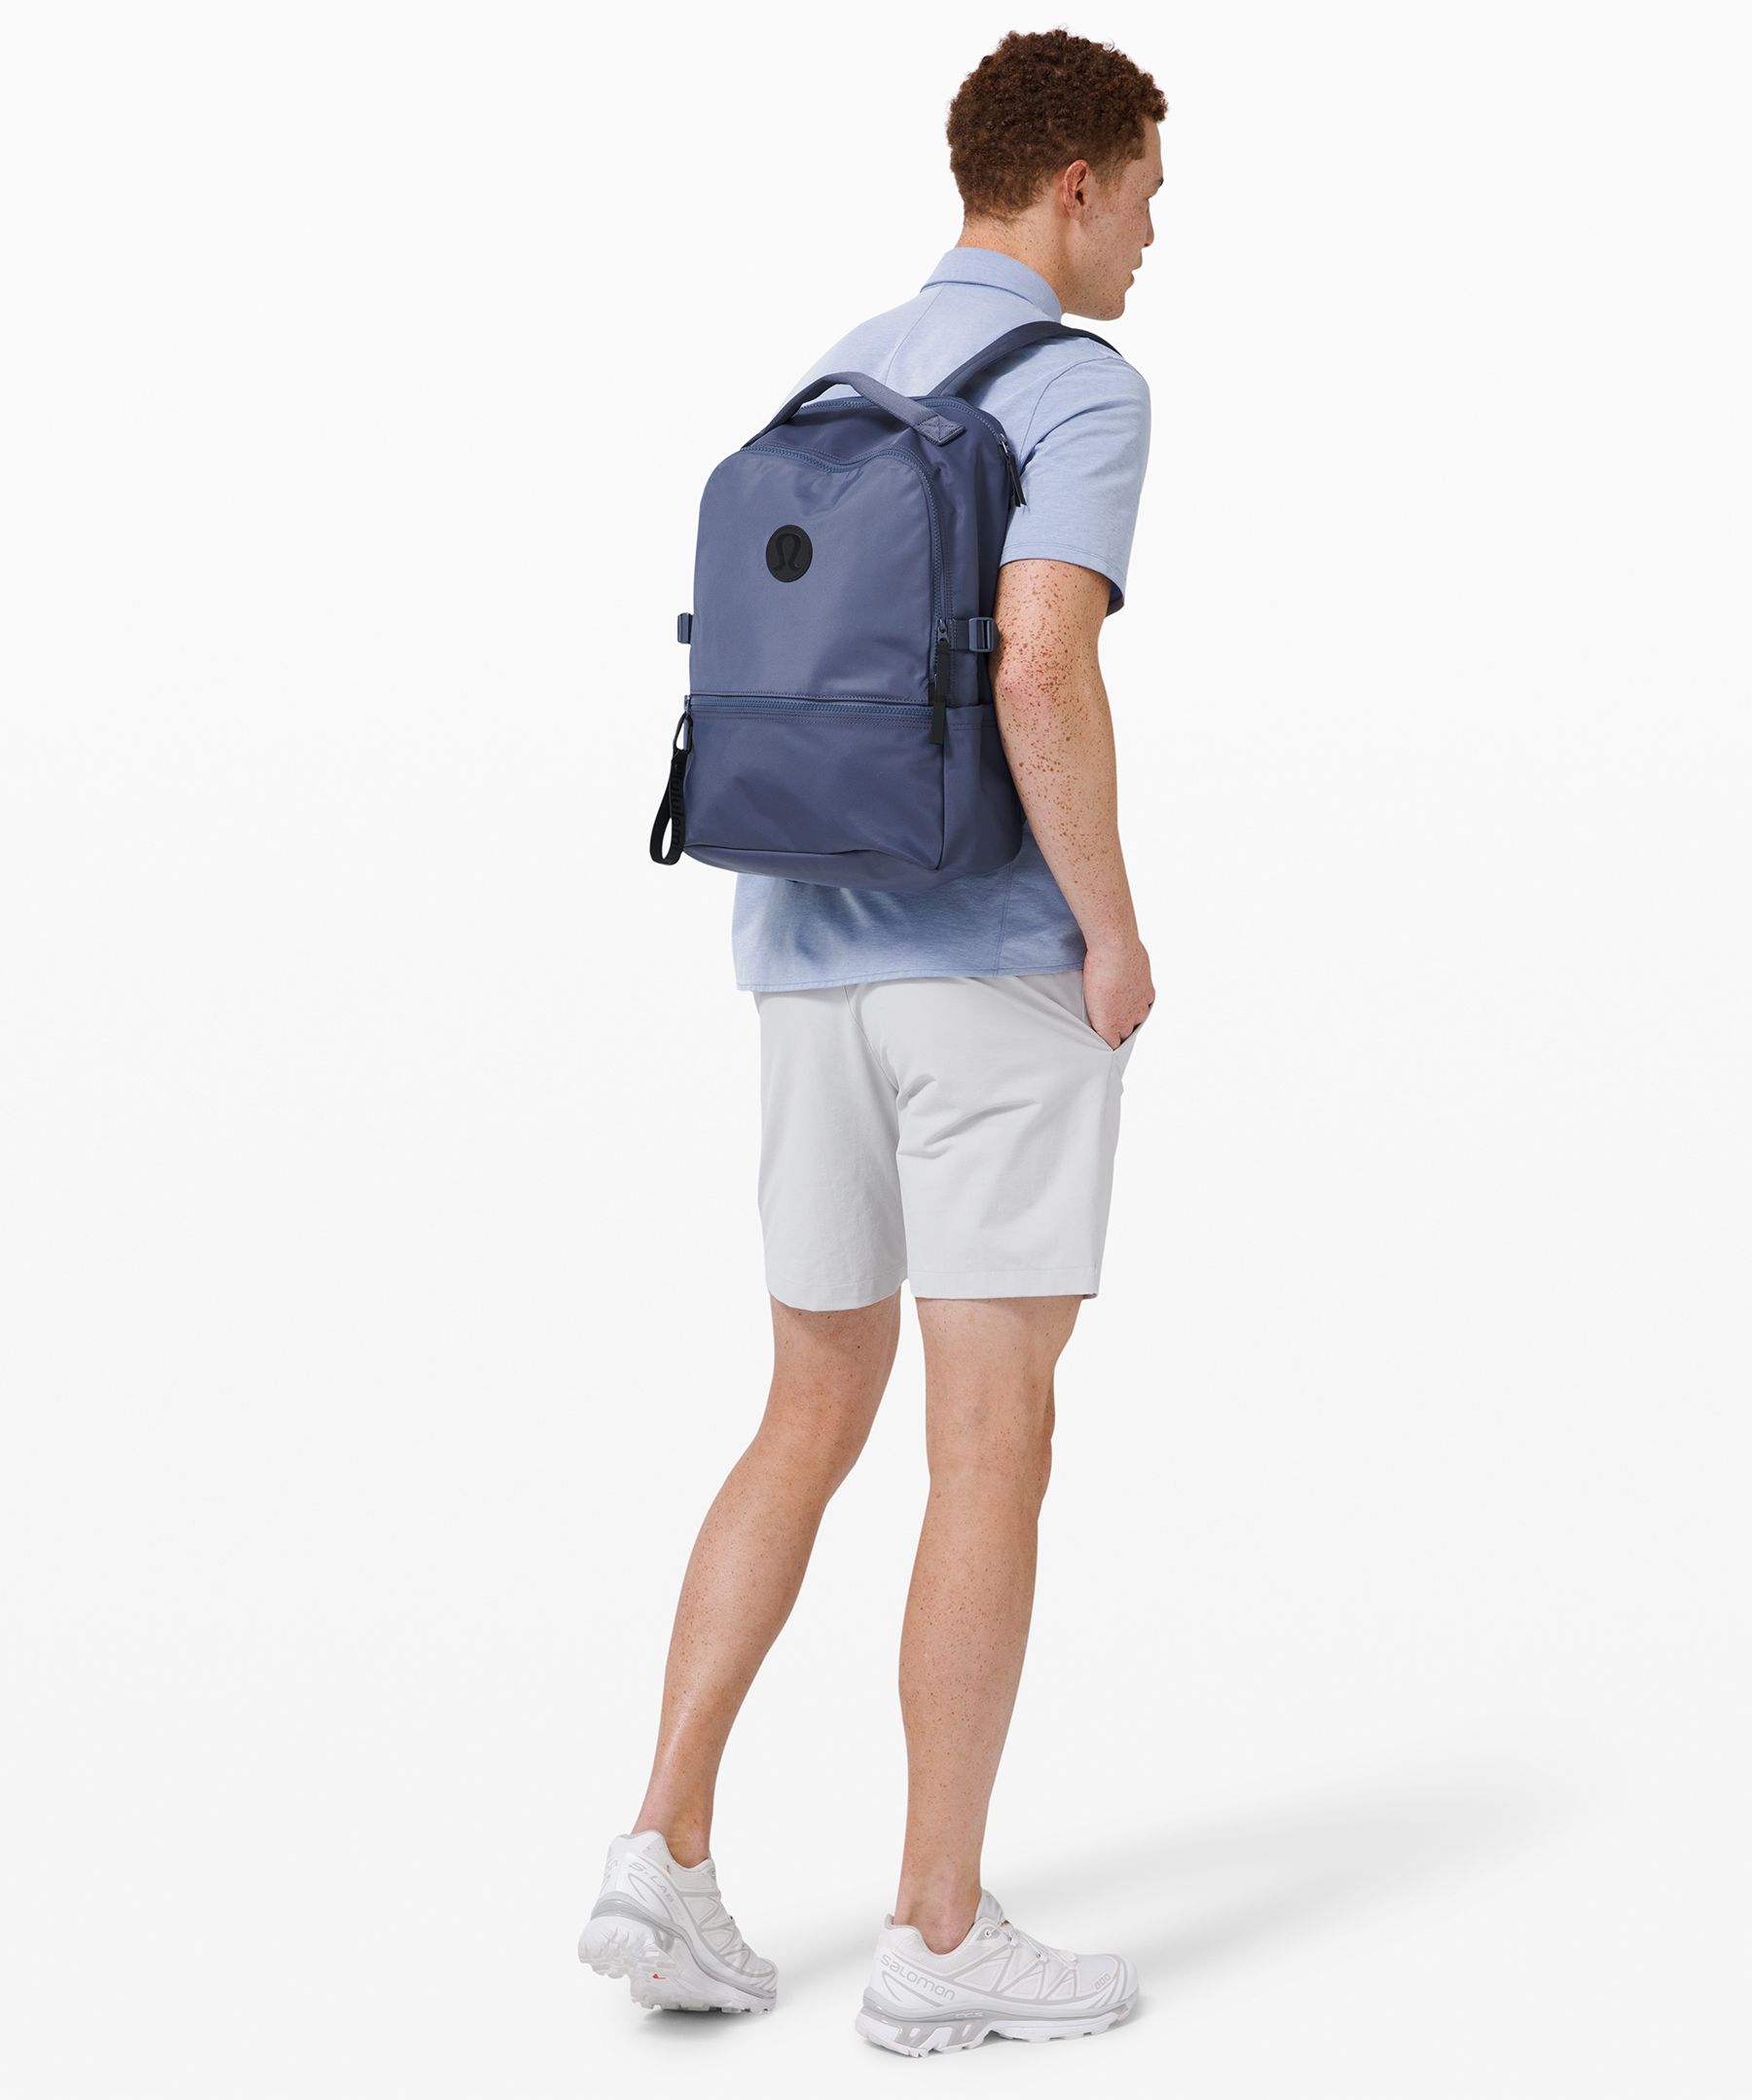 lululemon new crew backpack review